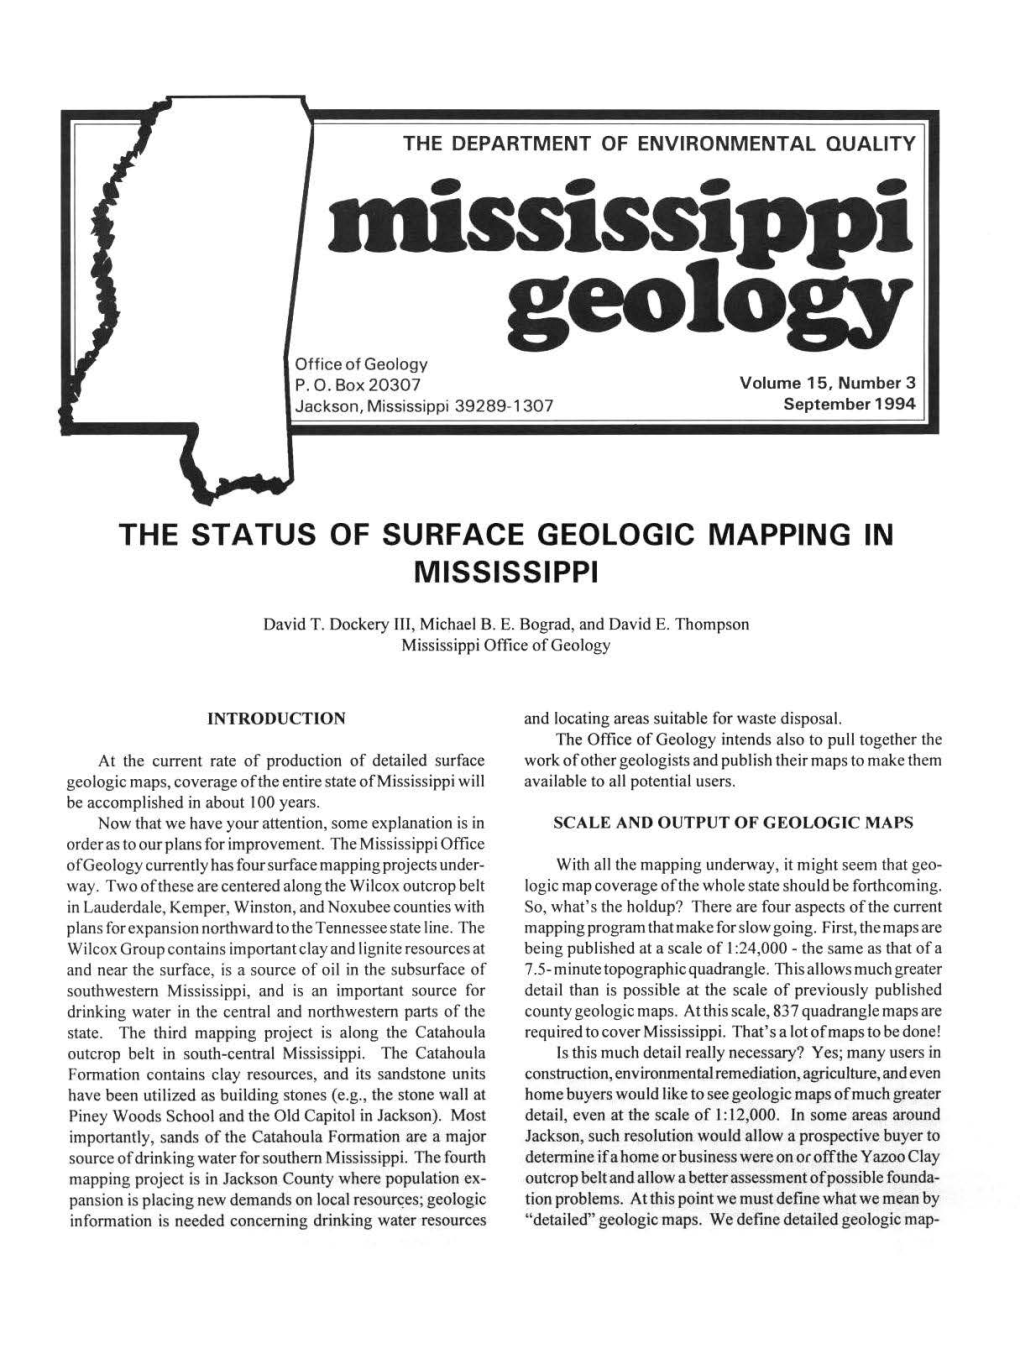 The Status of Surface Geologic Mapping in Mississippi